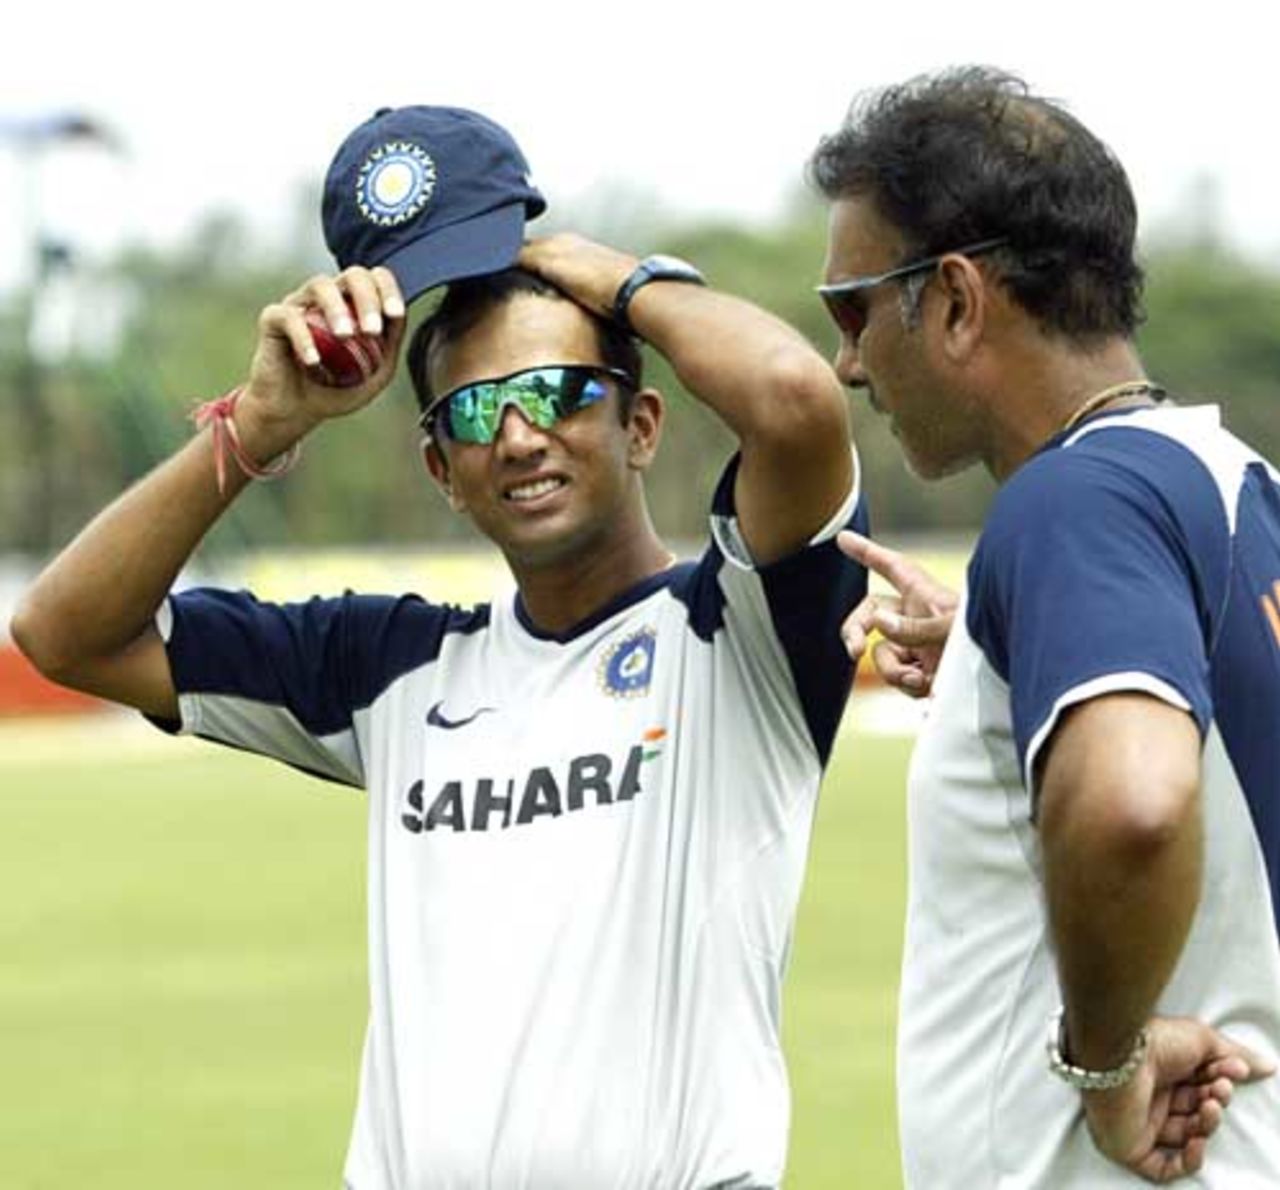 Rahul Dravid and Ravi Shastri have a chat before start of play